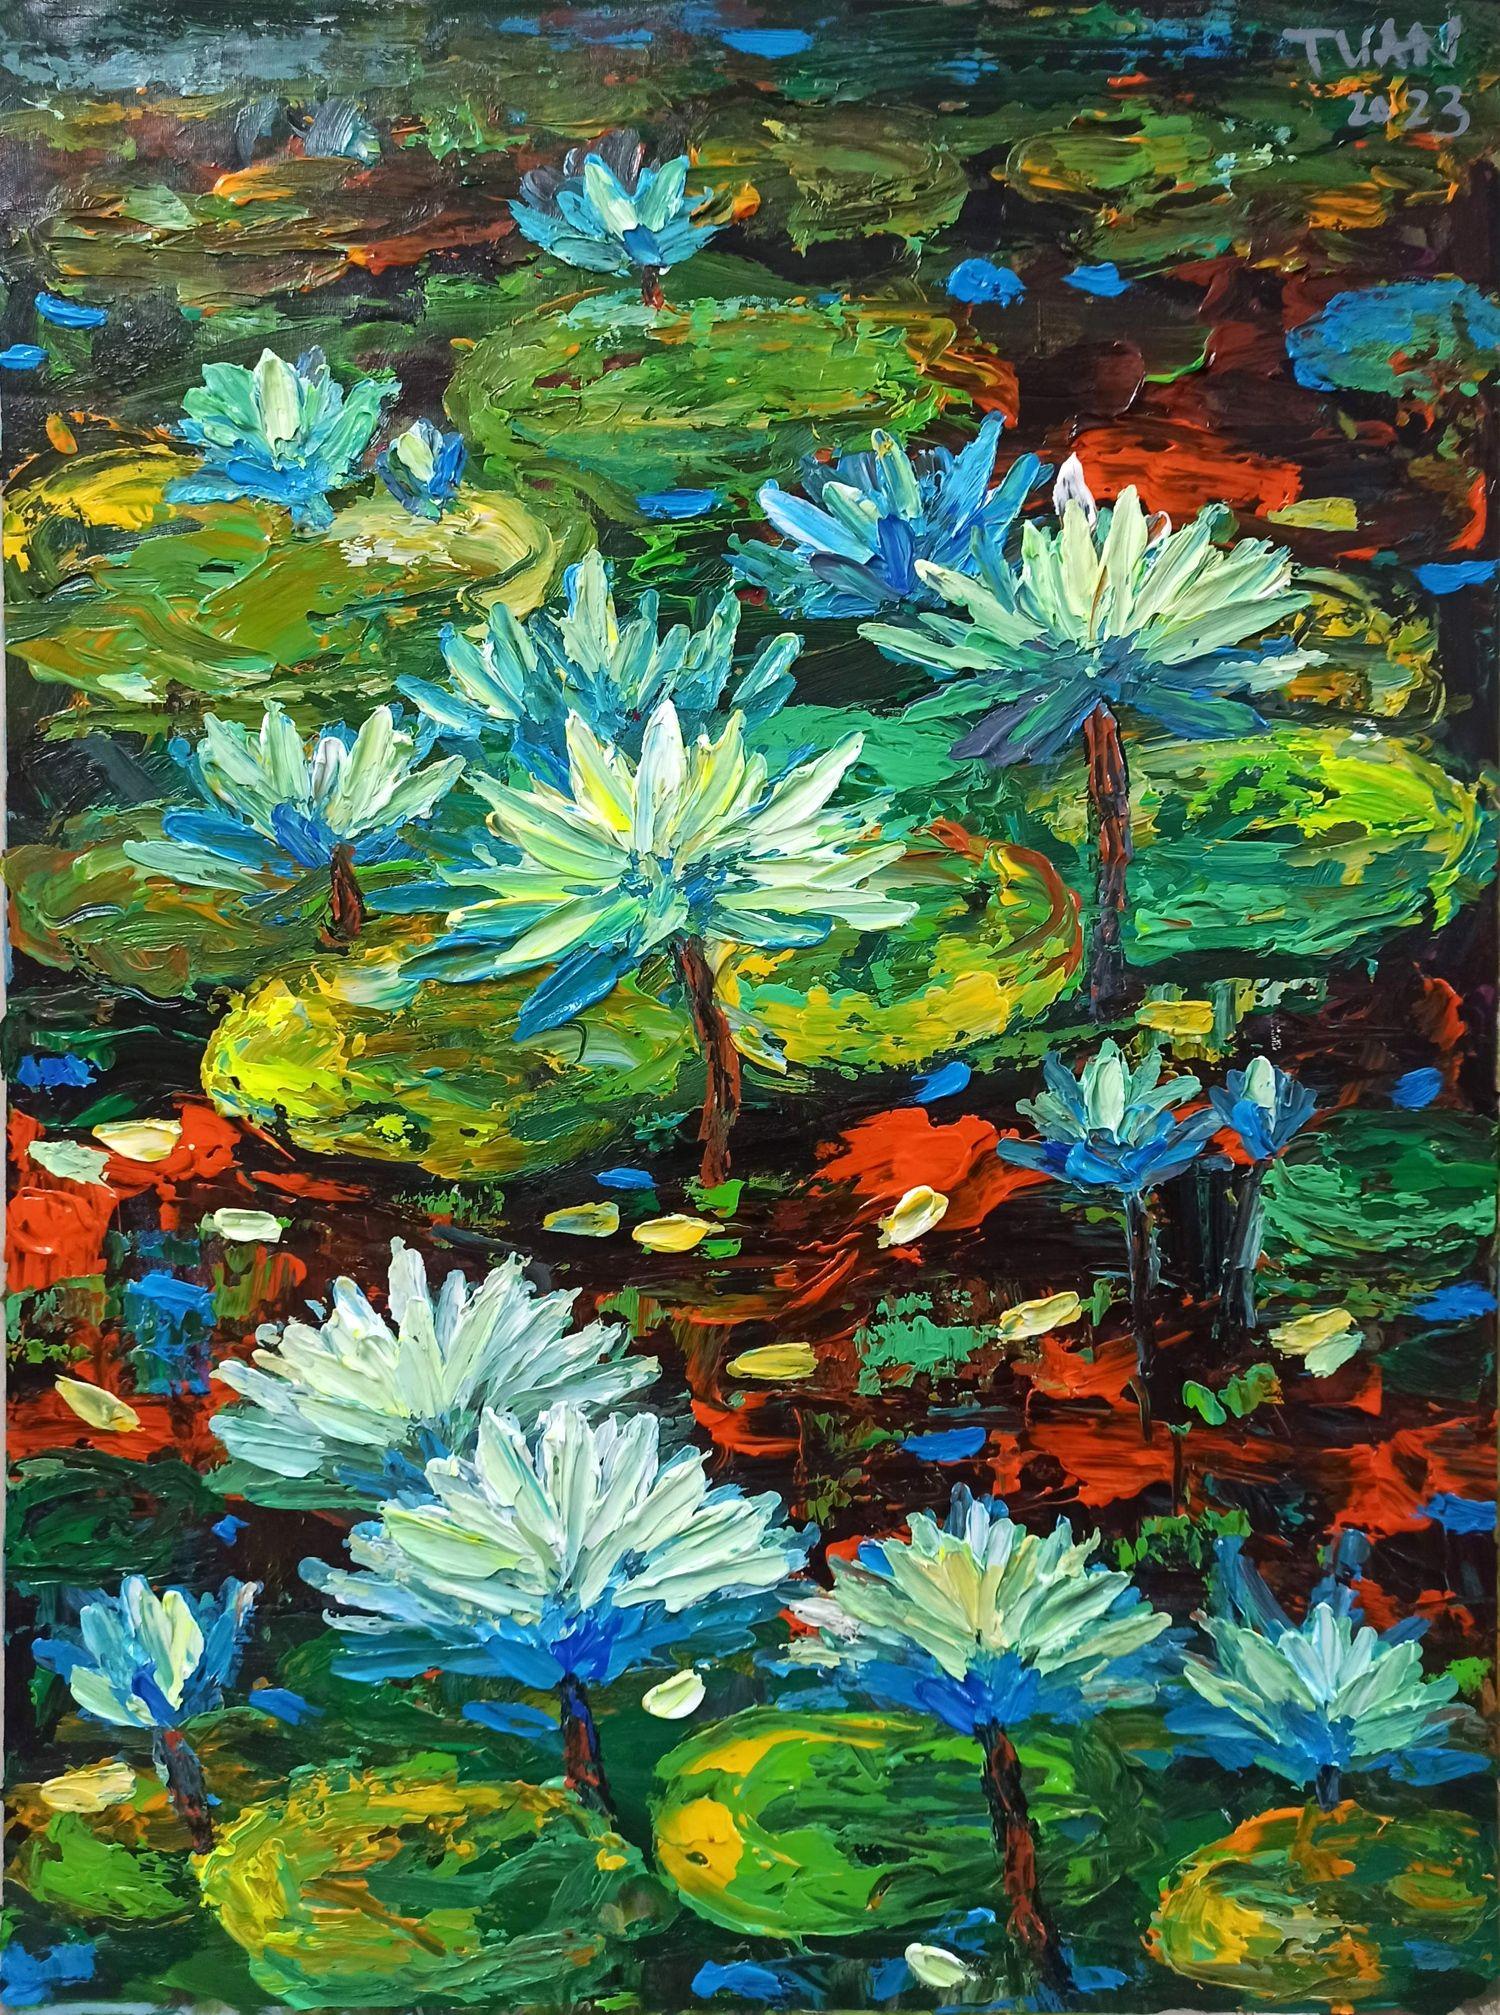 Along with the lotus, the water lily is considered the most beautiful flower in the aquatic world. Water lilies have many shapes, many colors, and a pure fragrance that flies far away  Water lilies only bloom most brilliantly in the morning, so the